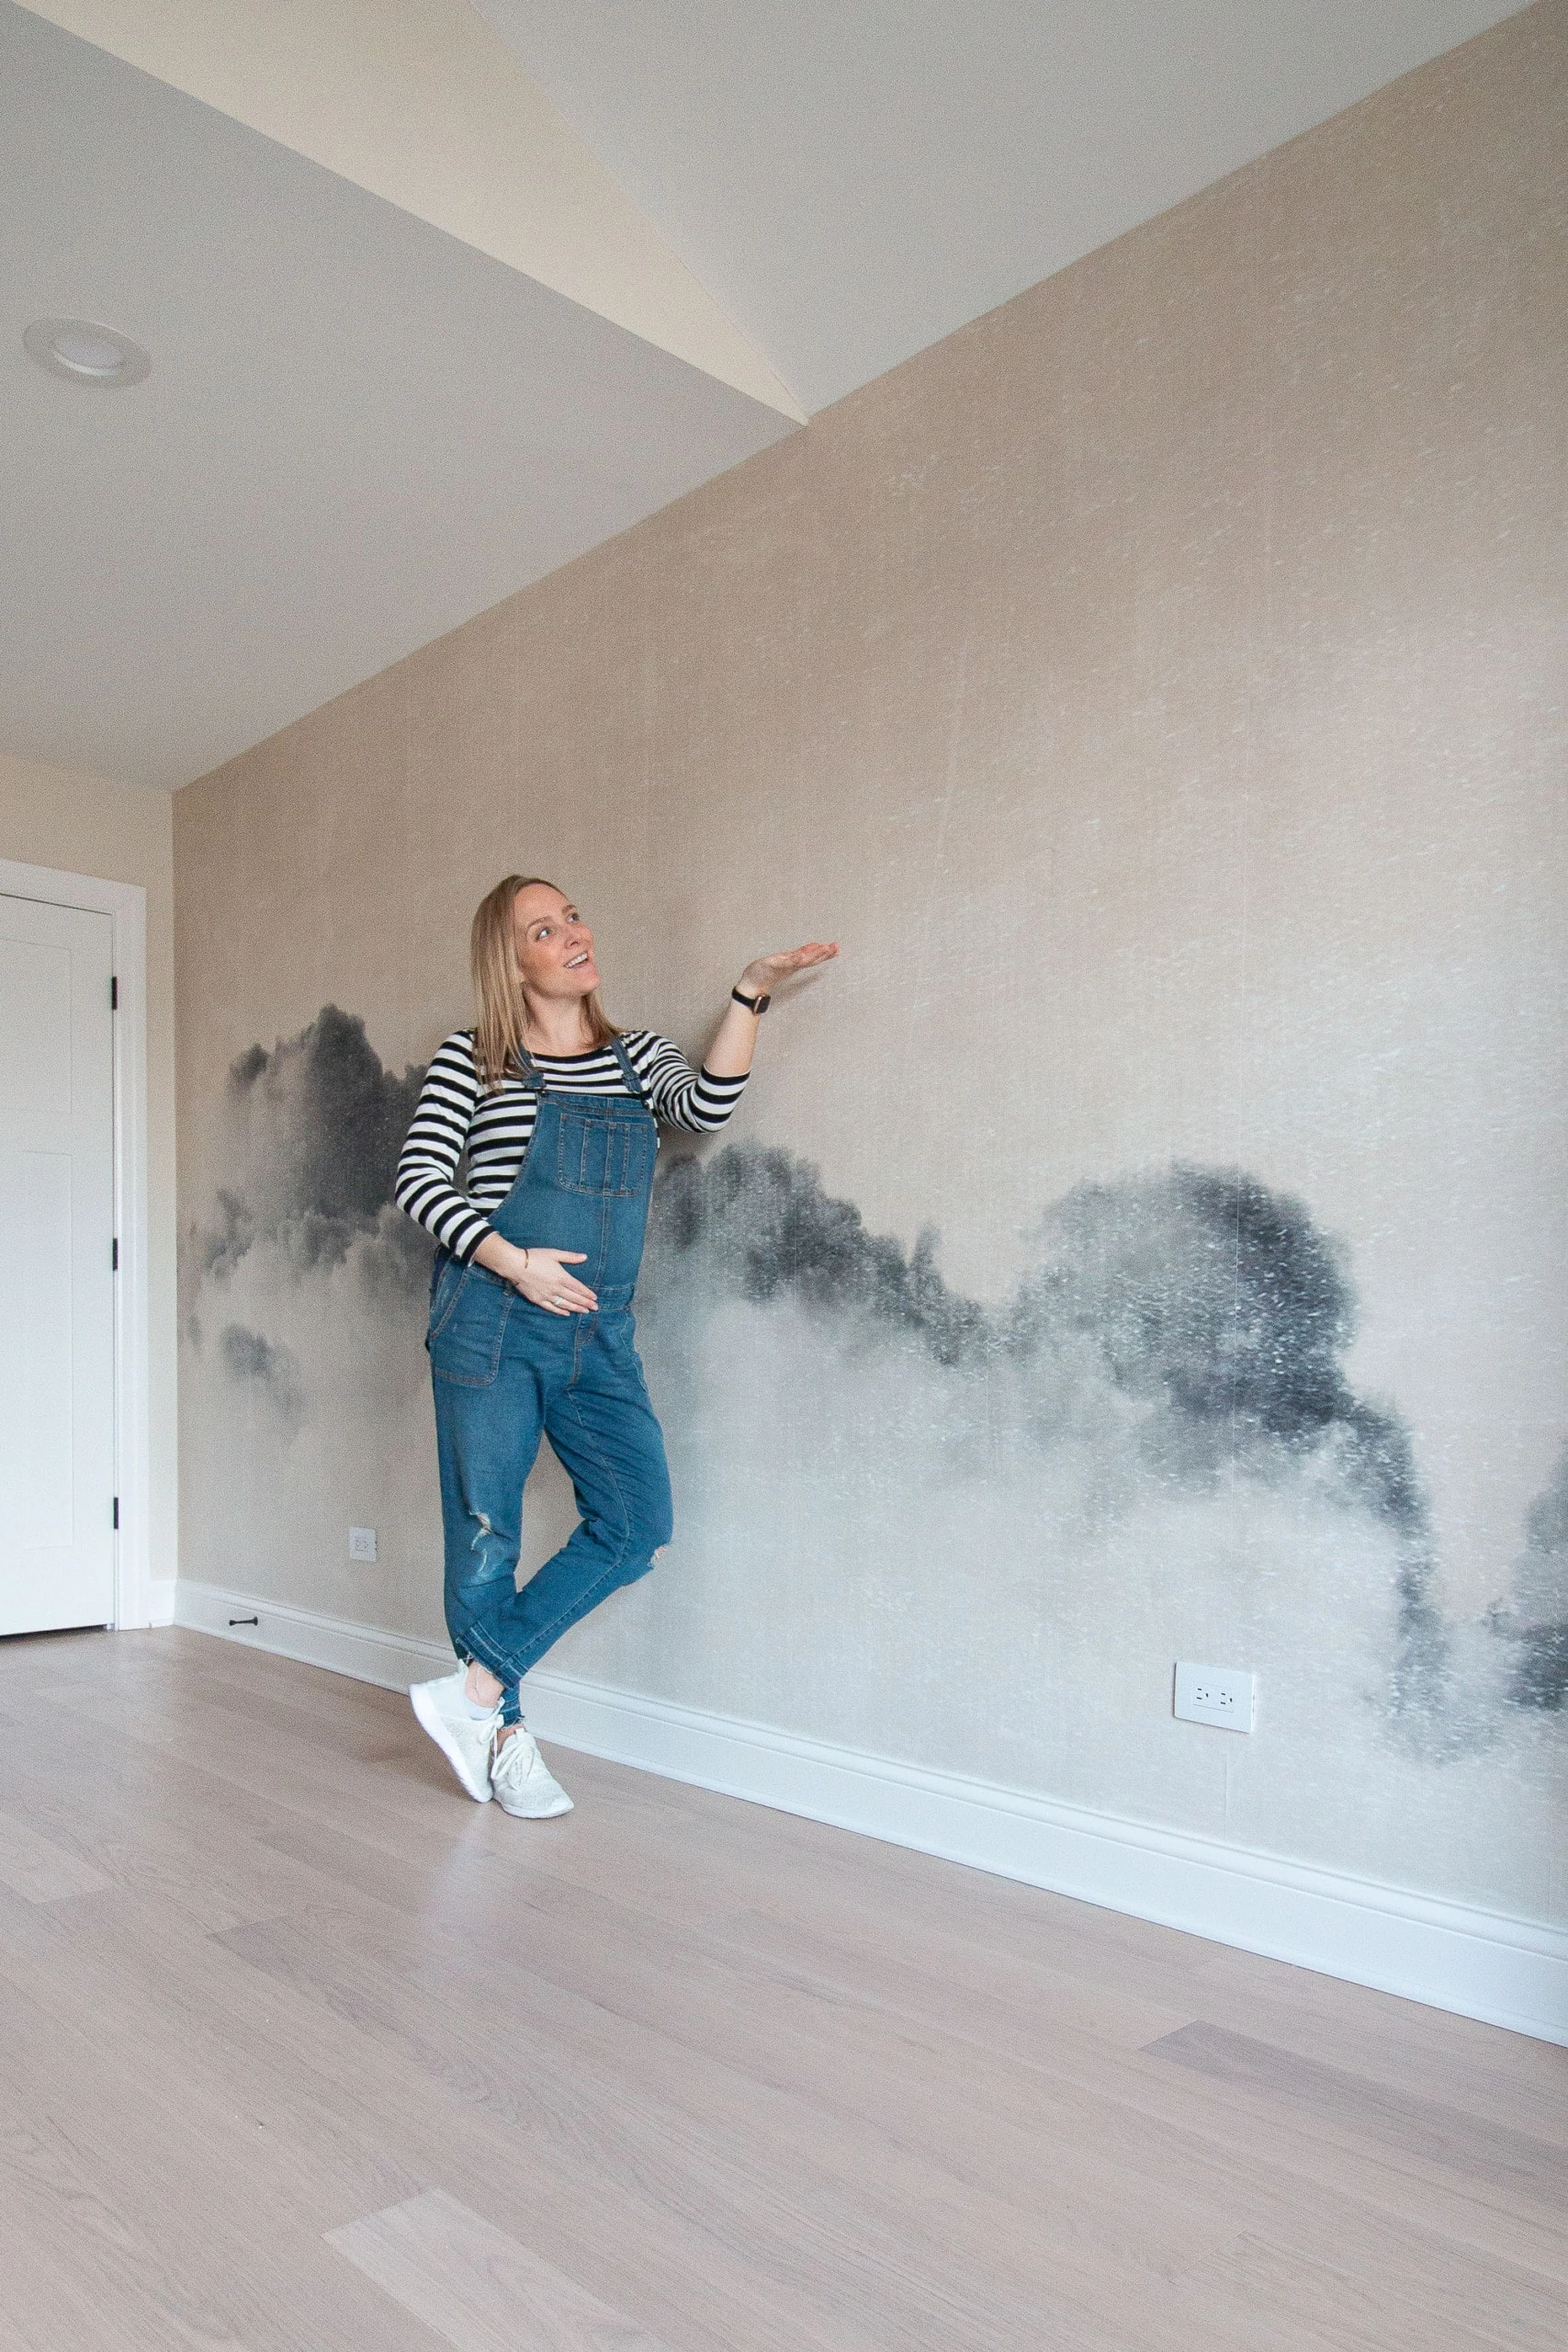 How to install a wall mural